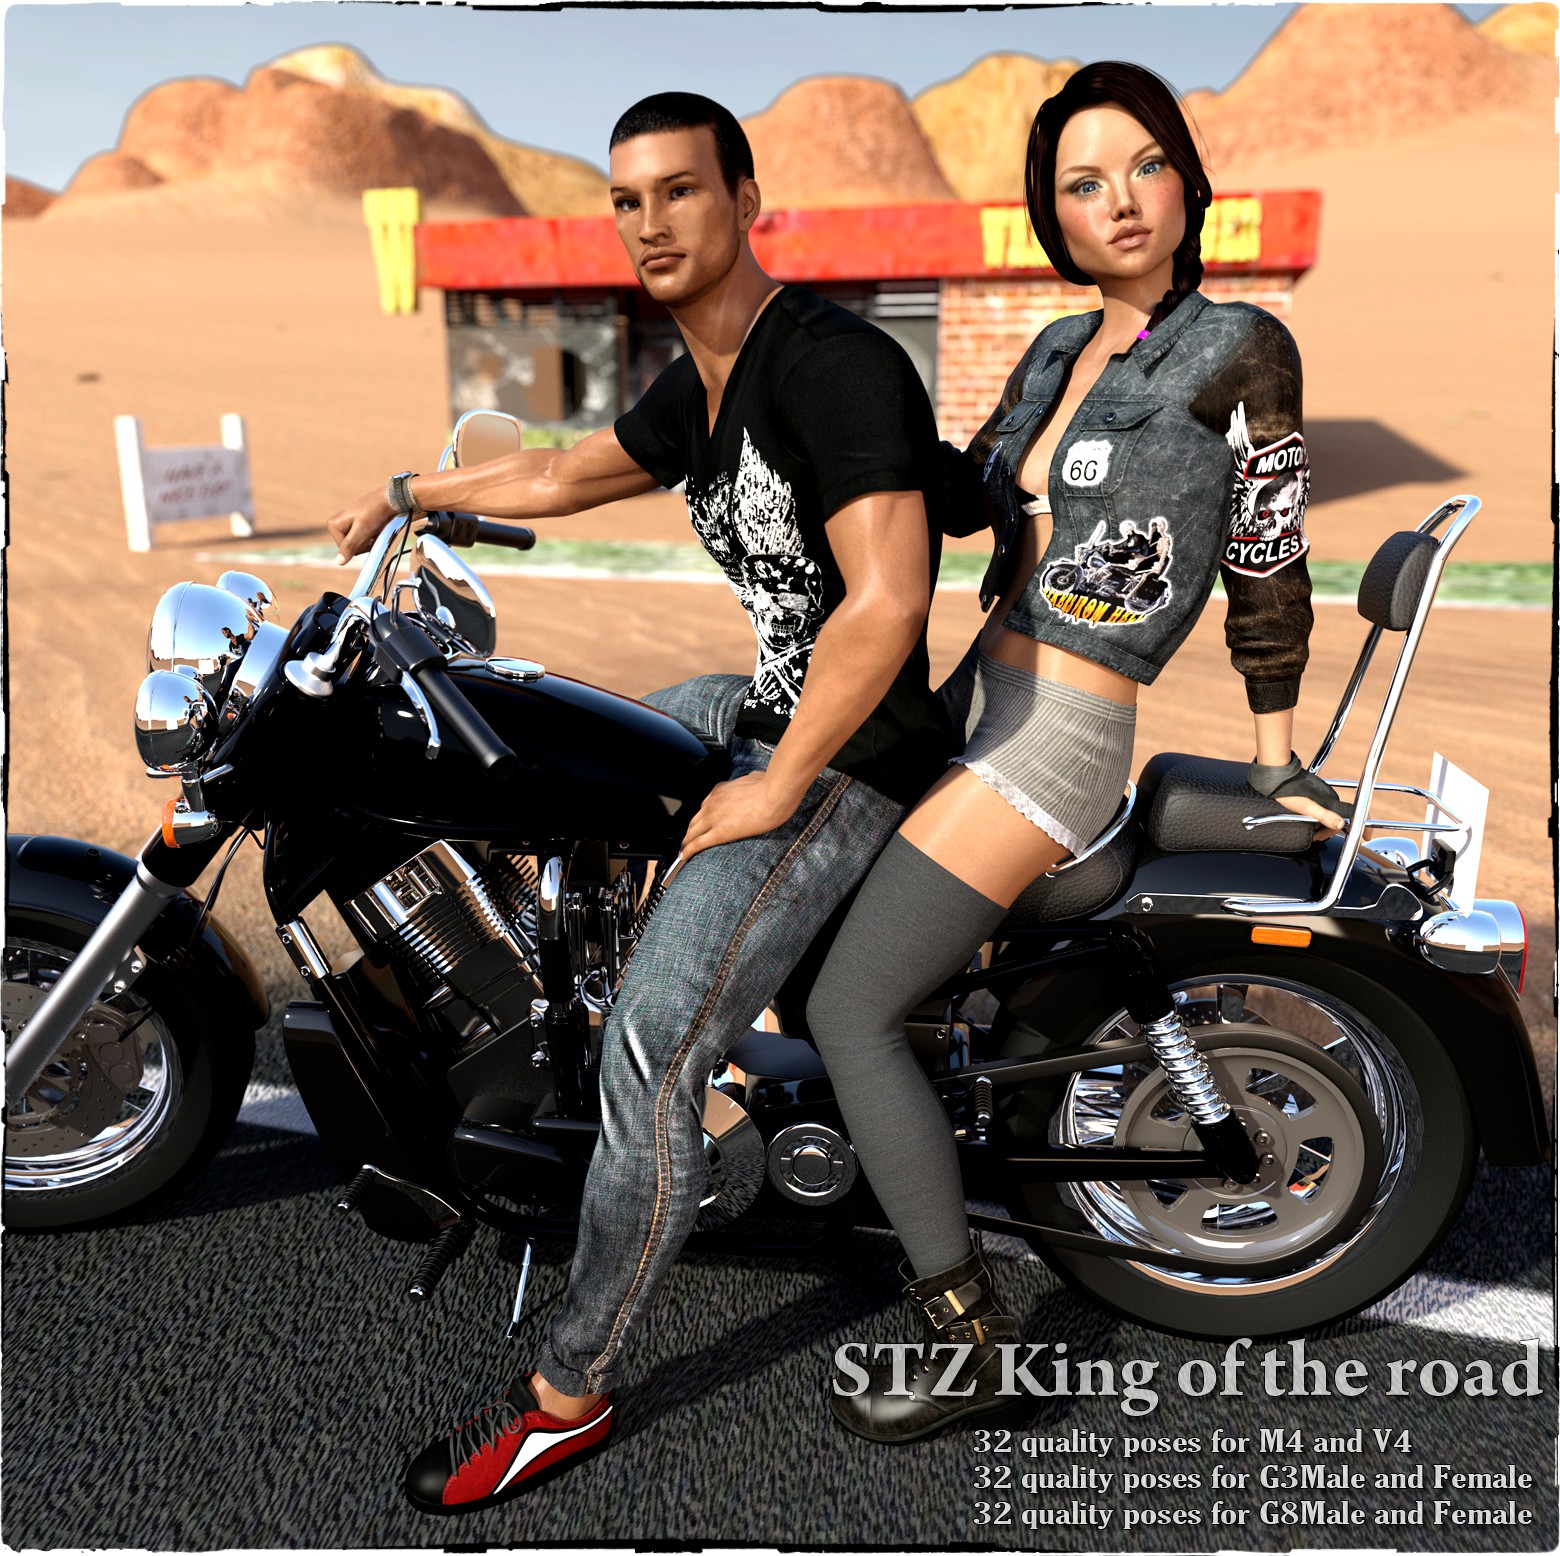 STZ King of the road